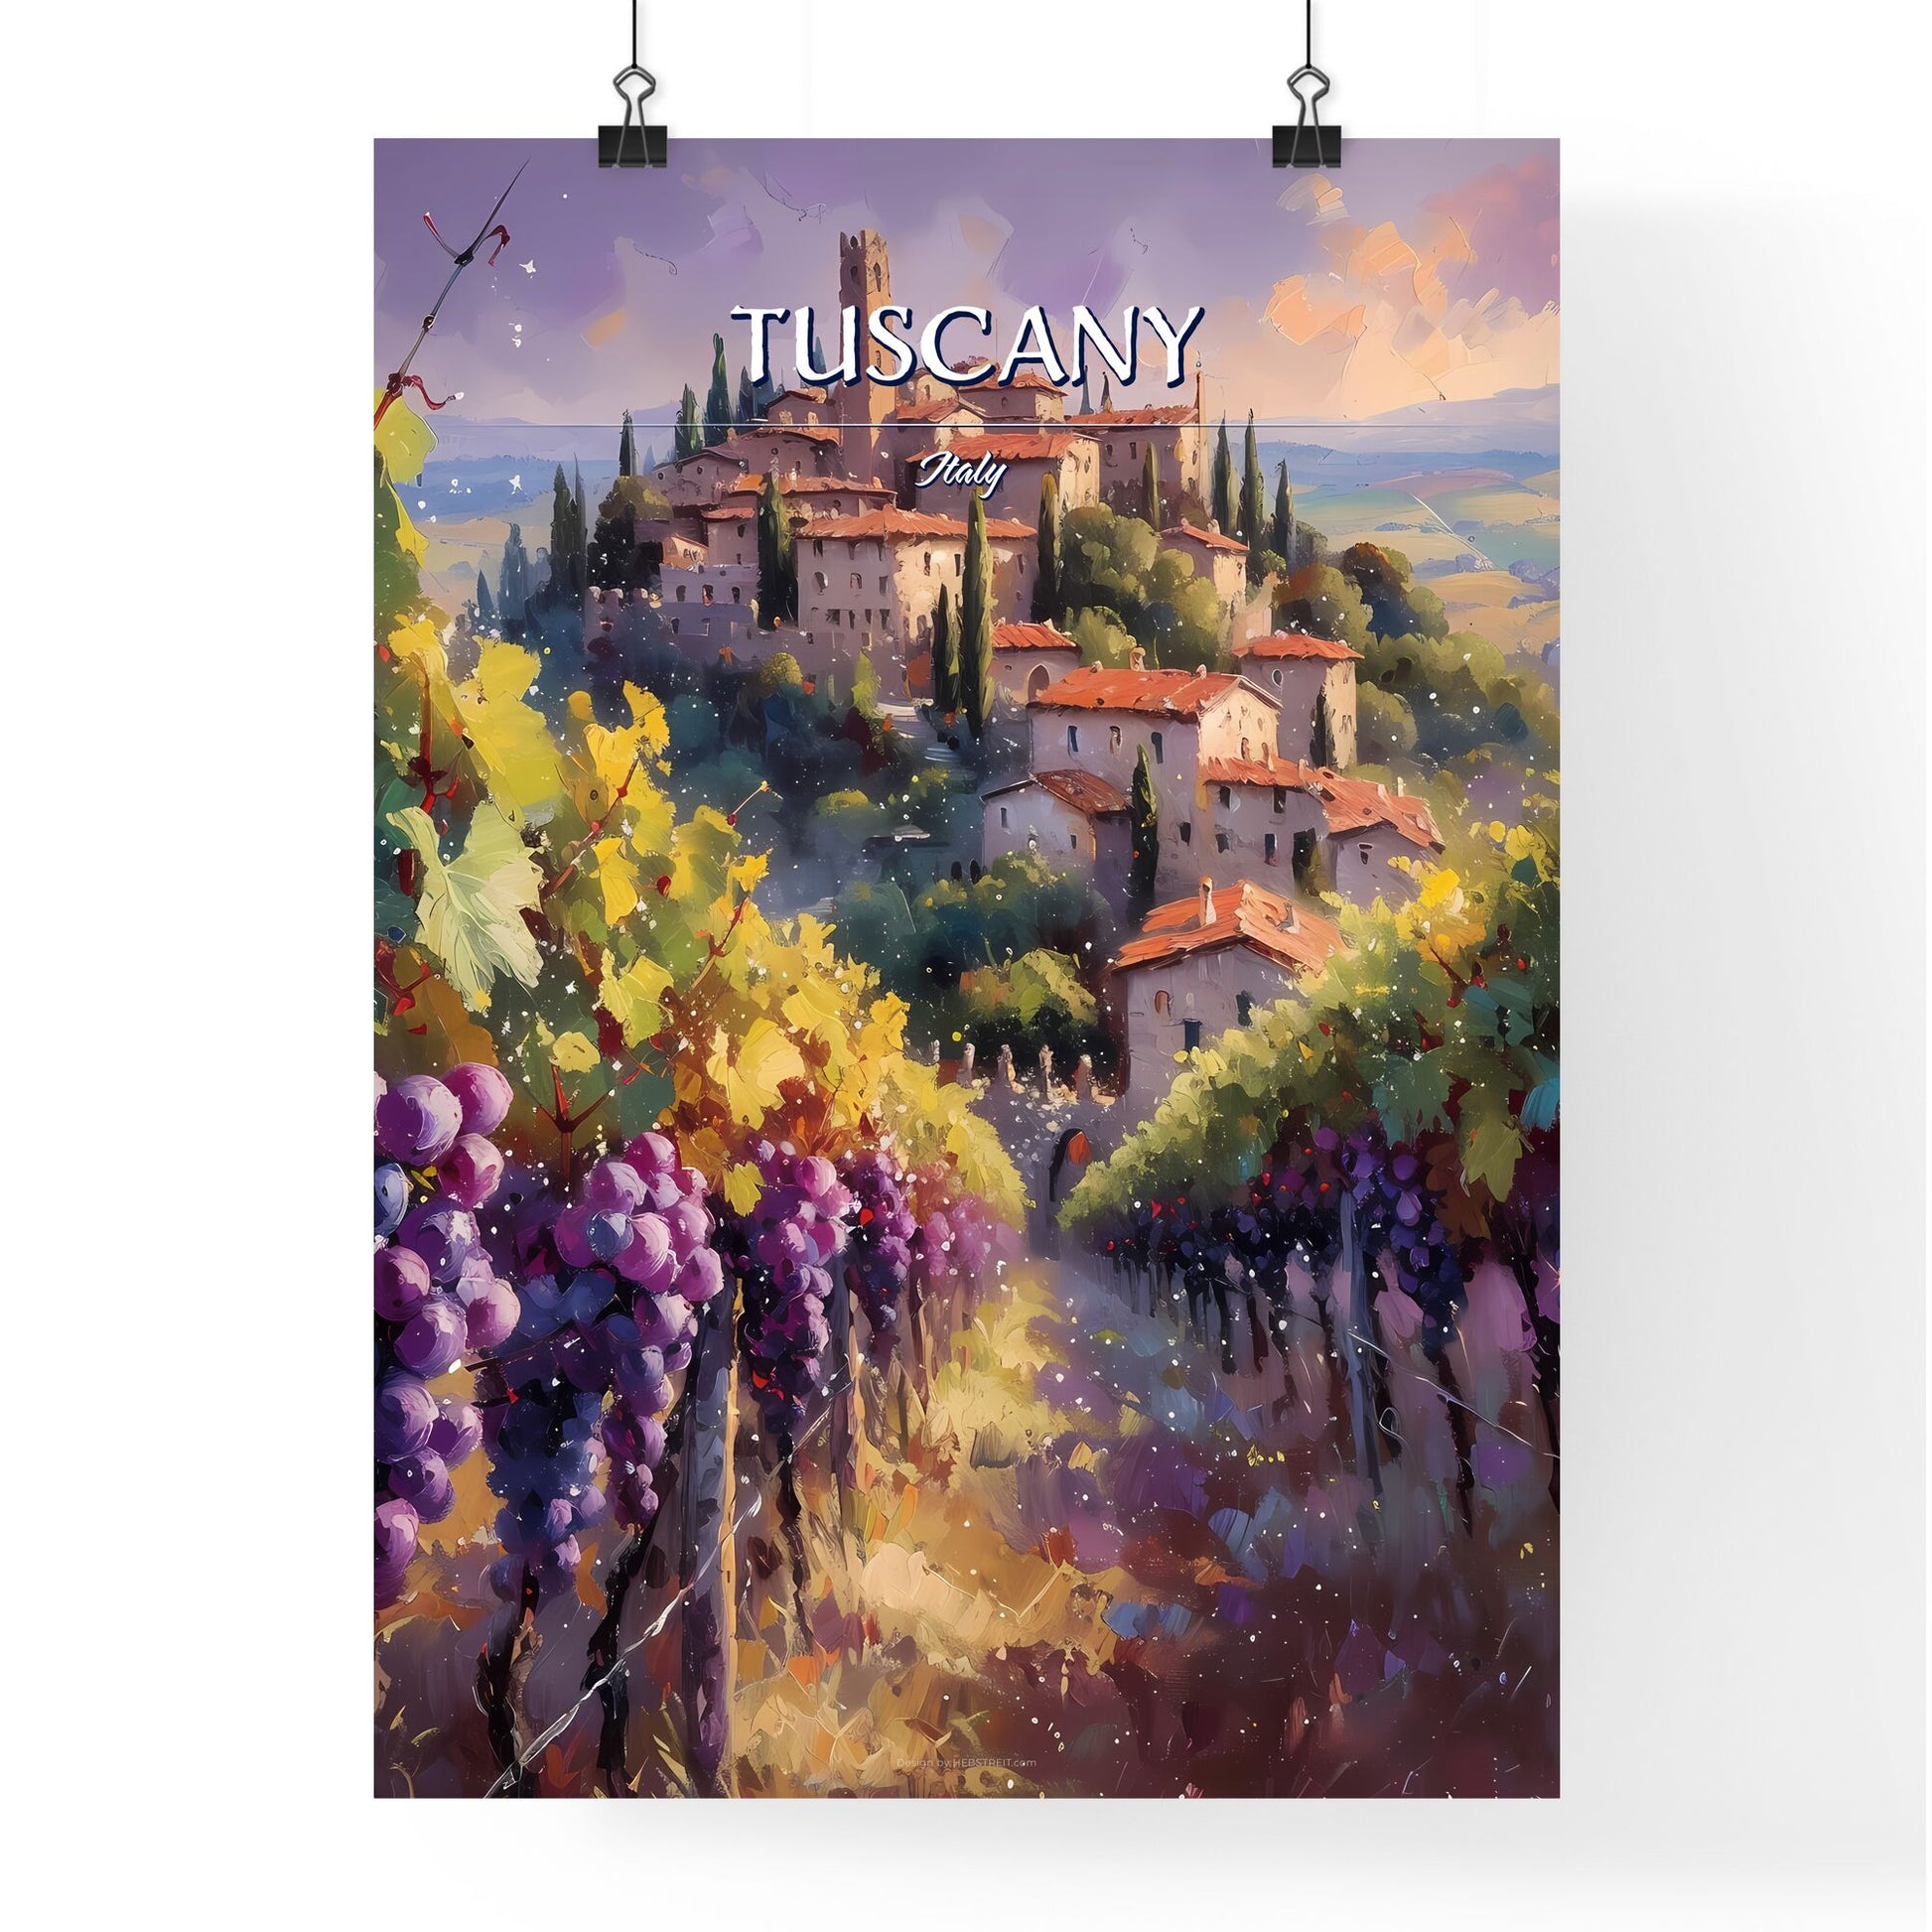 Tuscany, Italy - Art print of a painting of a town on a hill with grapes Default Title